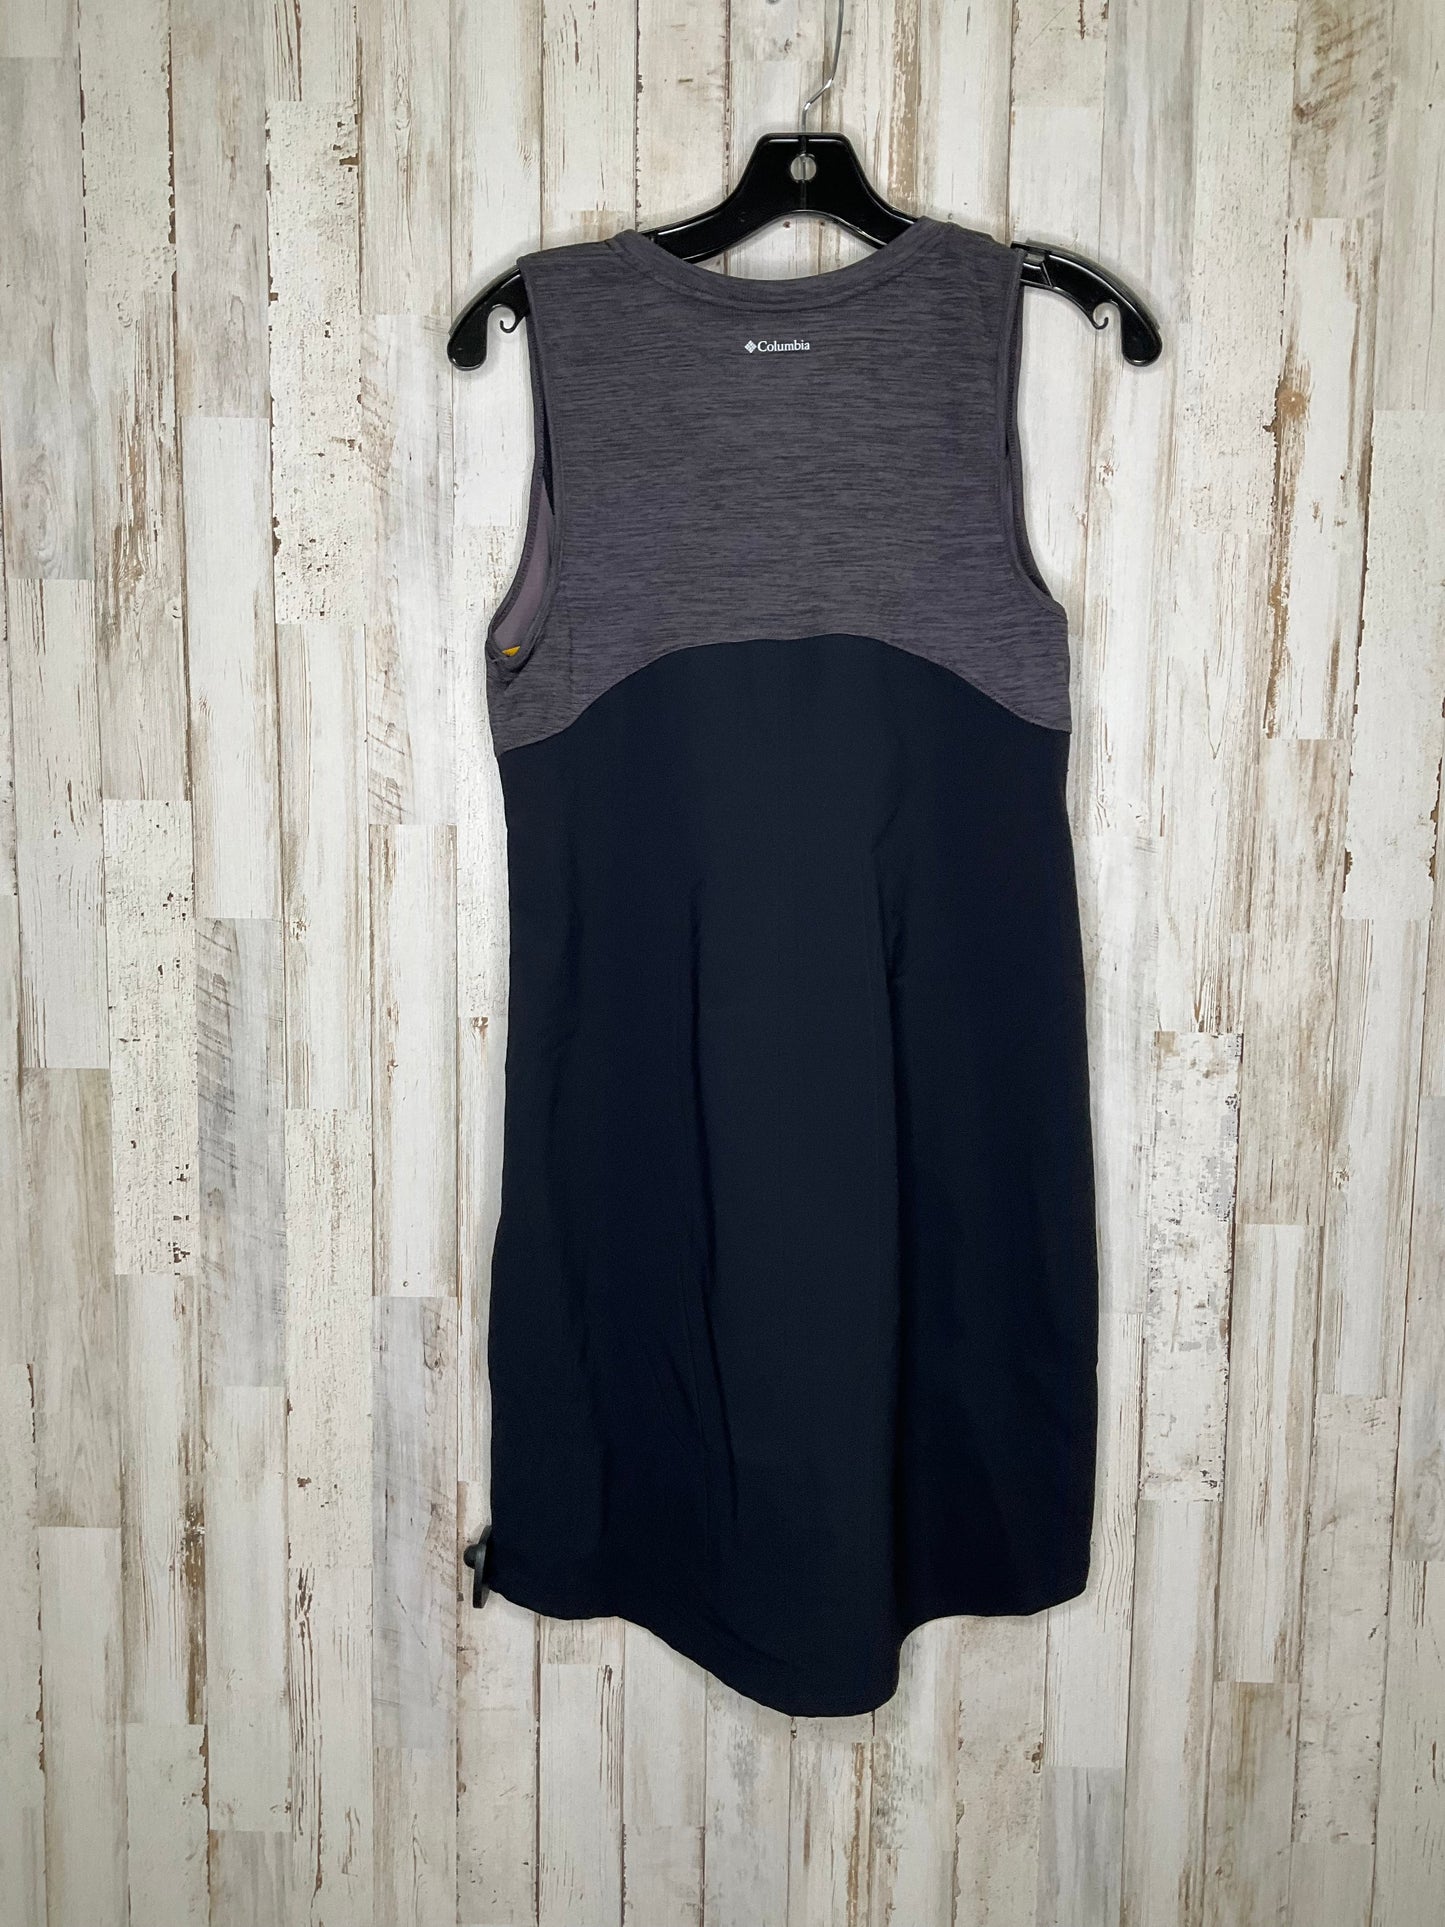 Athletic Dress By Columbia  Size: S